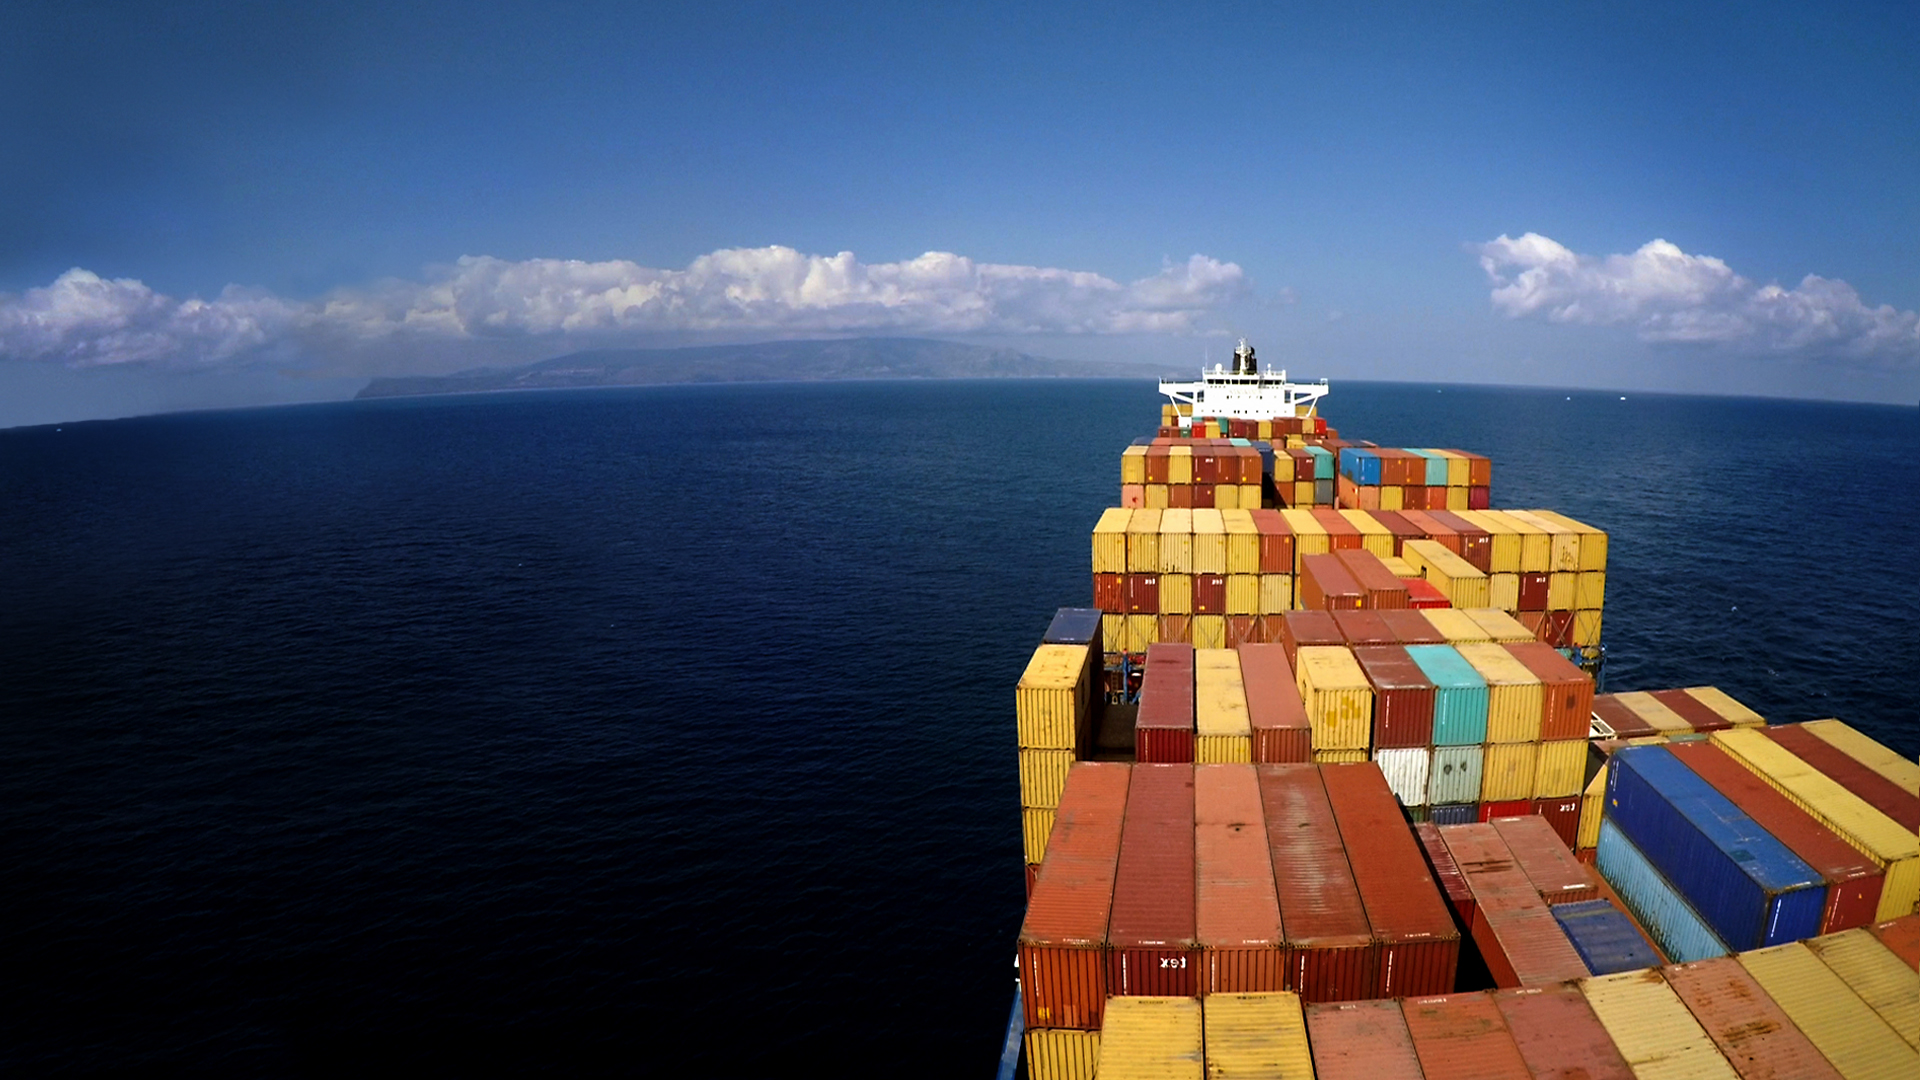 Freightened: The Real Price of Shipping